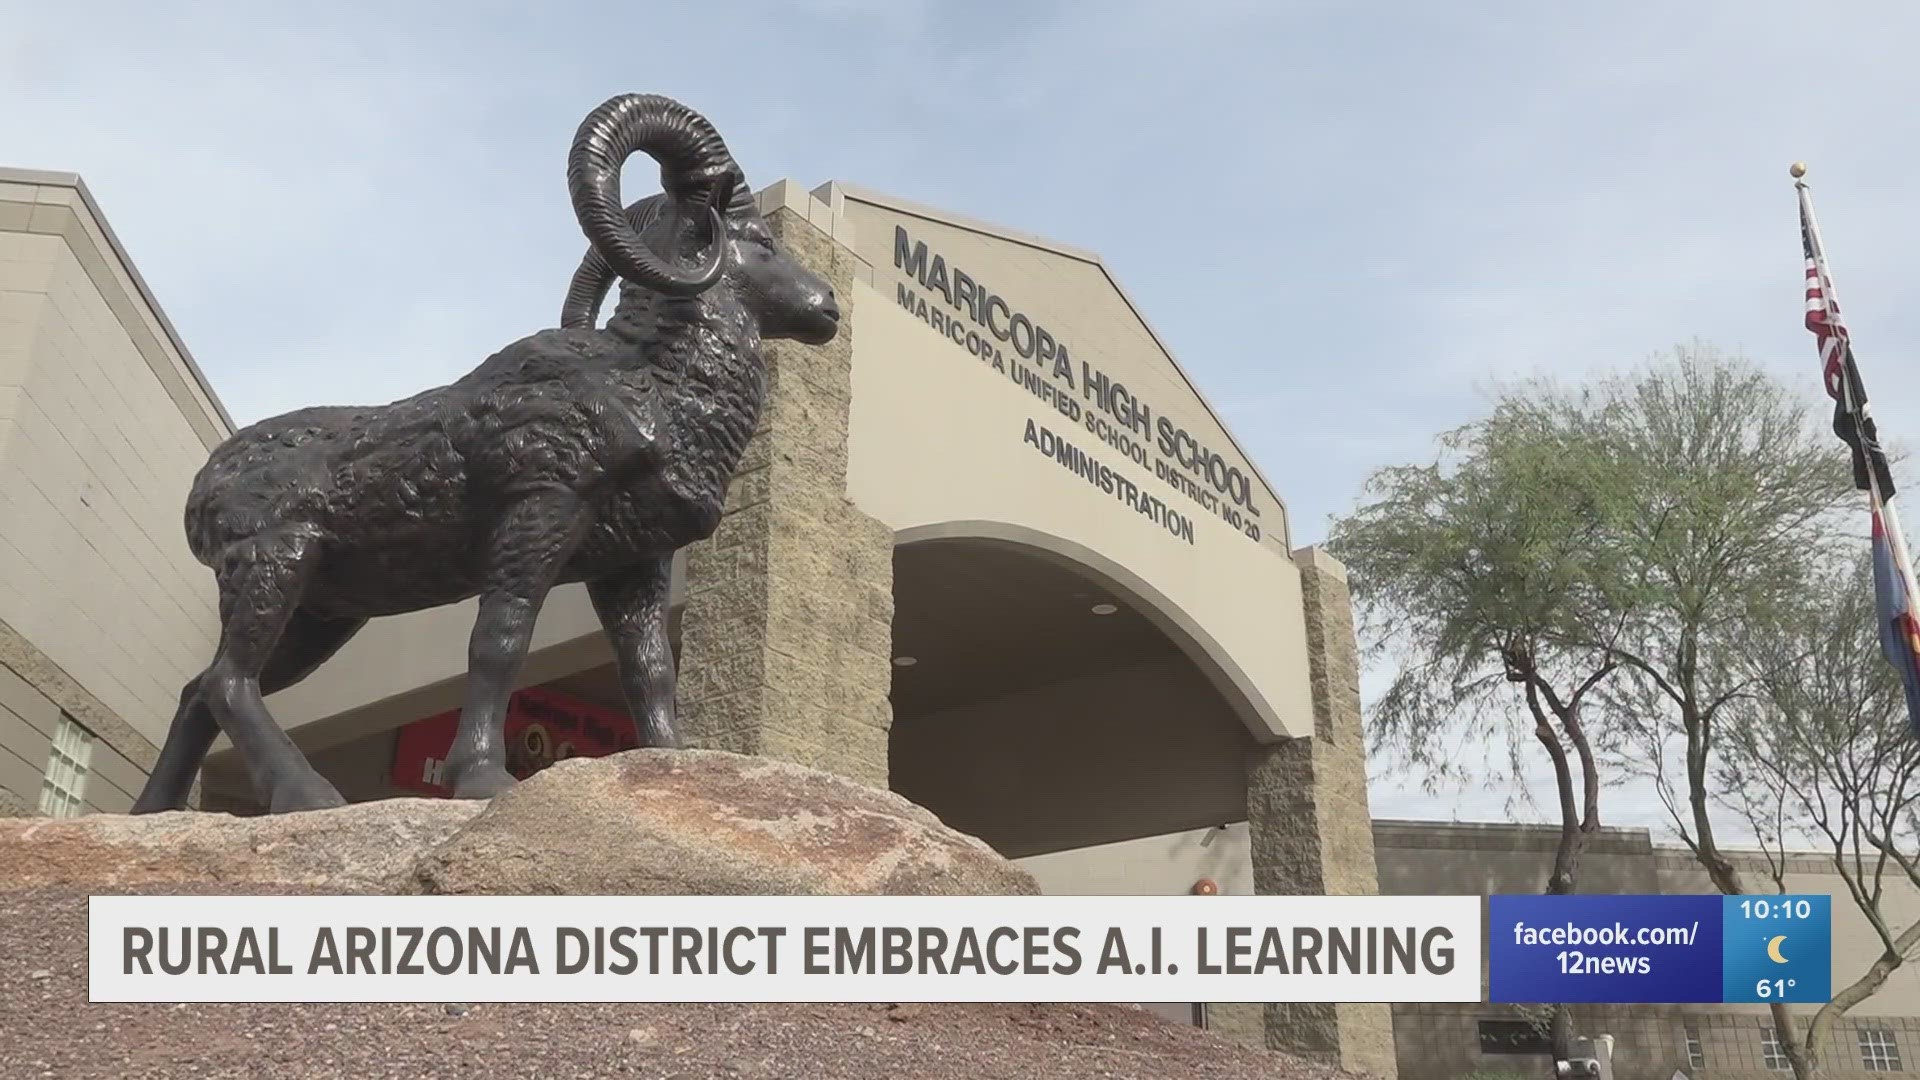 A small but growing school district south of metro Phoenix is aggressively implementing A.I. technology into its curriculum.